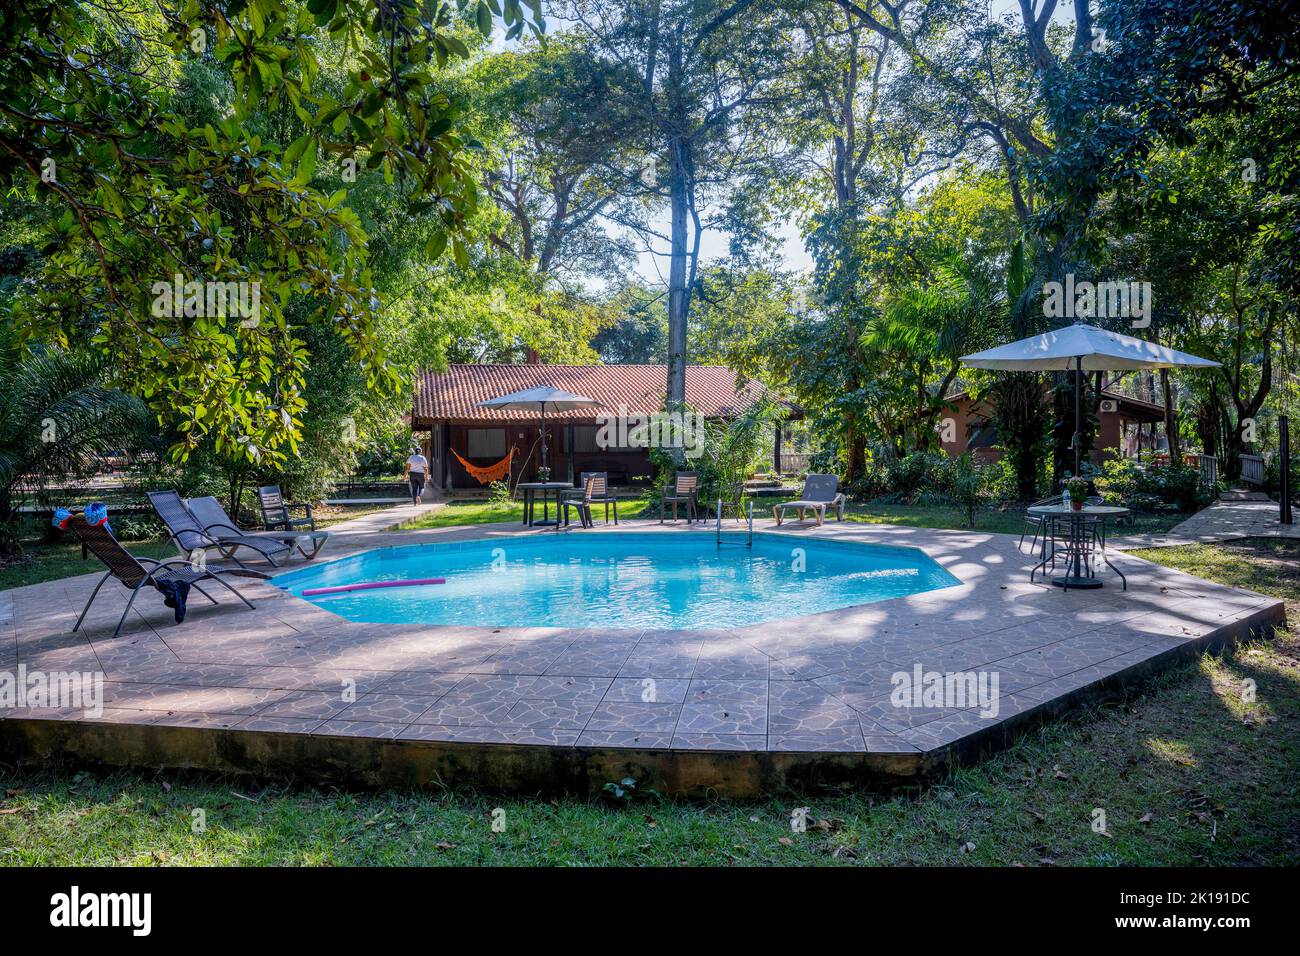 The swimming pool at the Aymara Lodge in the northern Pantanal, Mato Grosso province in Brazil. Stock Photo